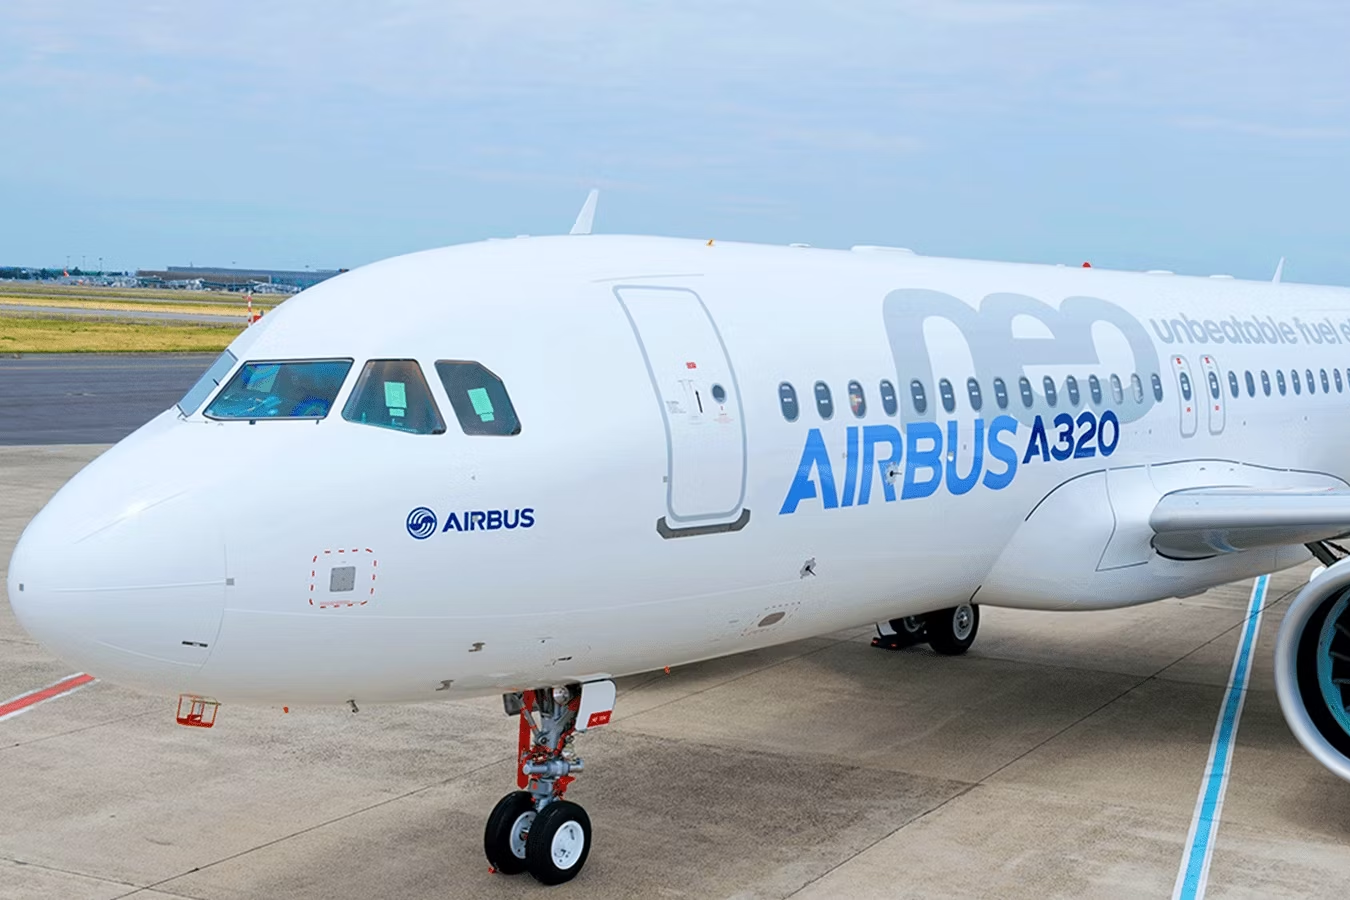 An Airbus A320neo in house livery parked at an airport.